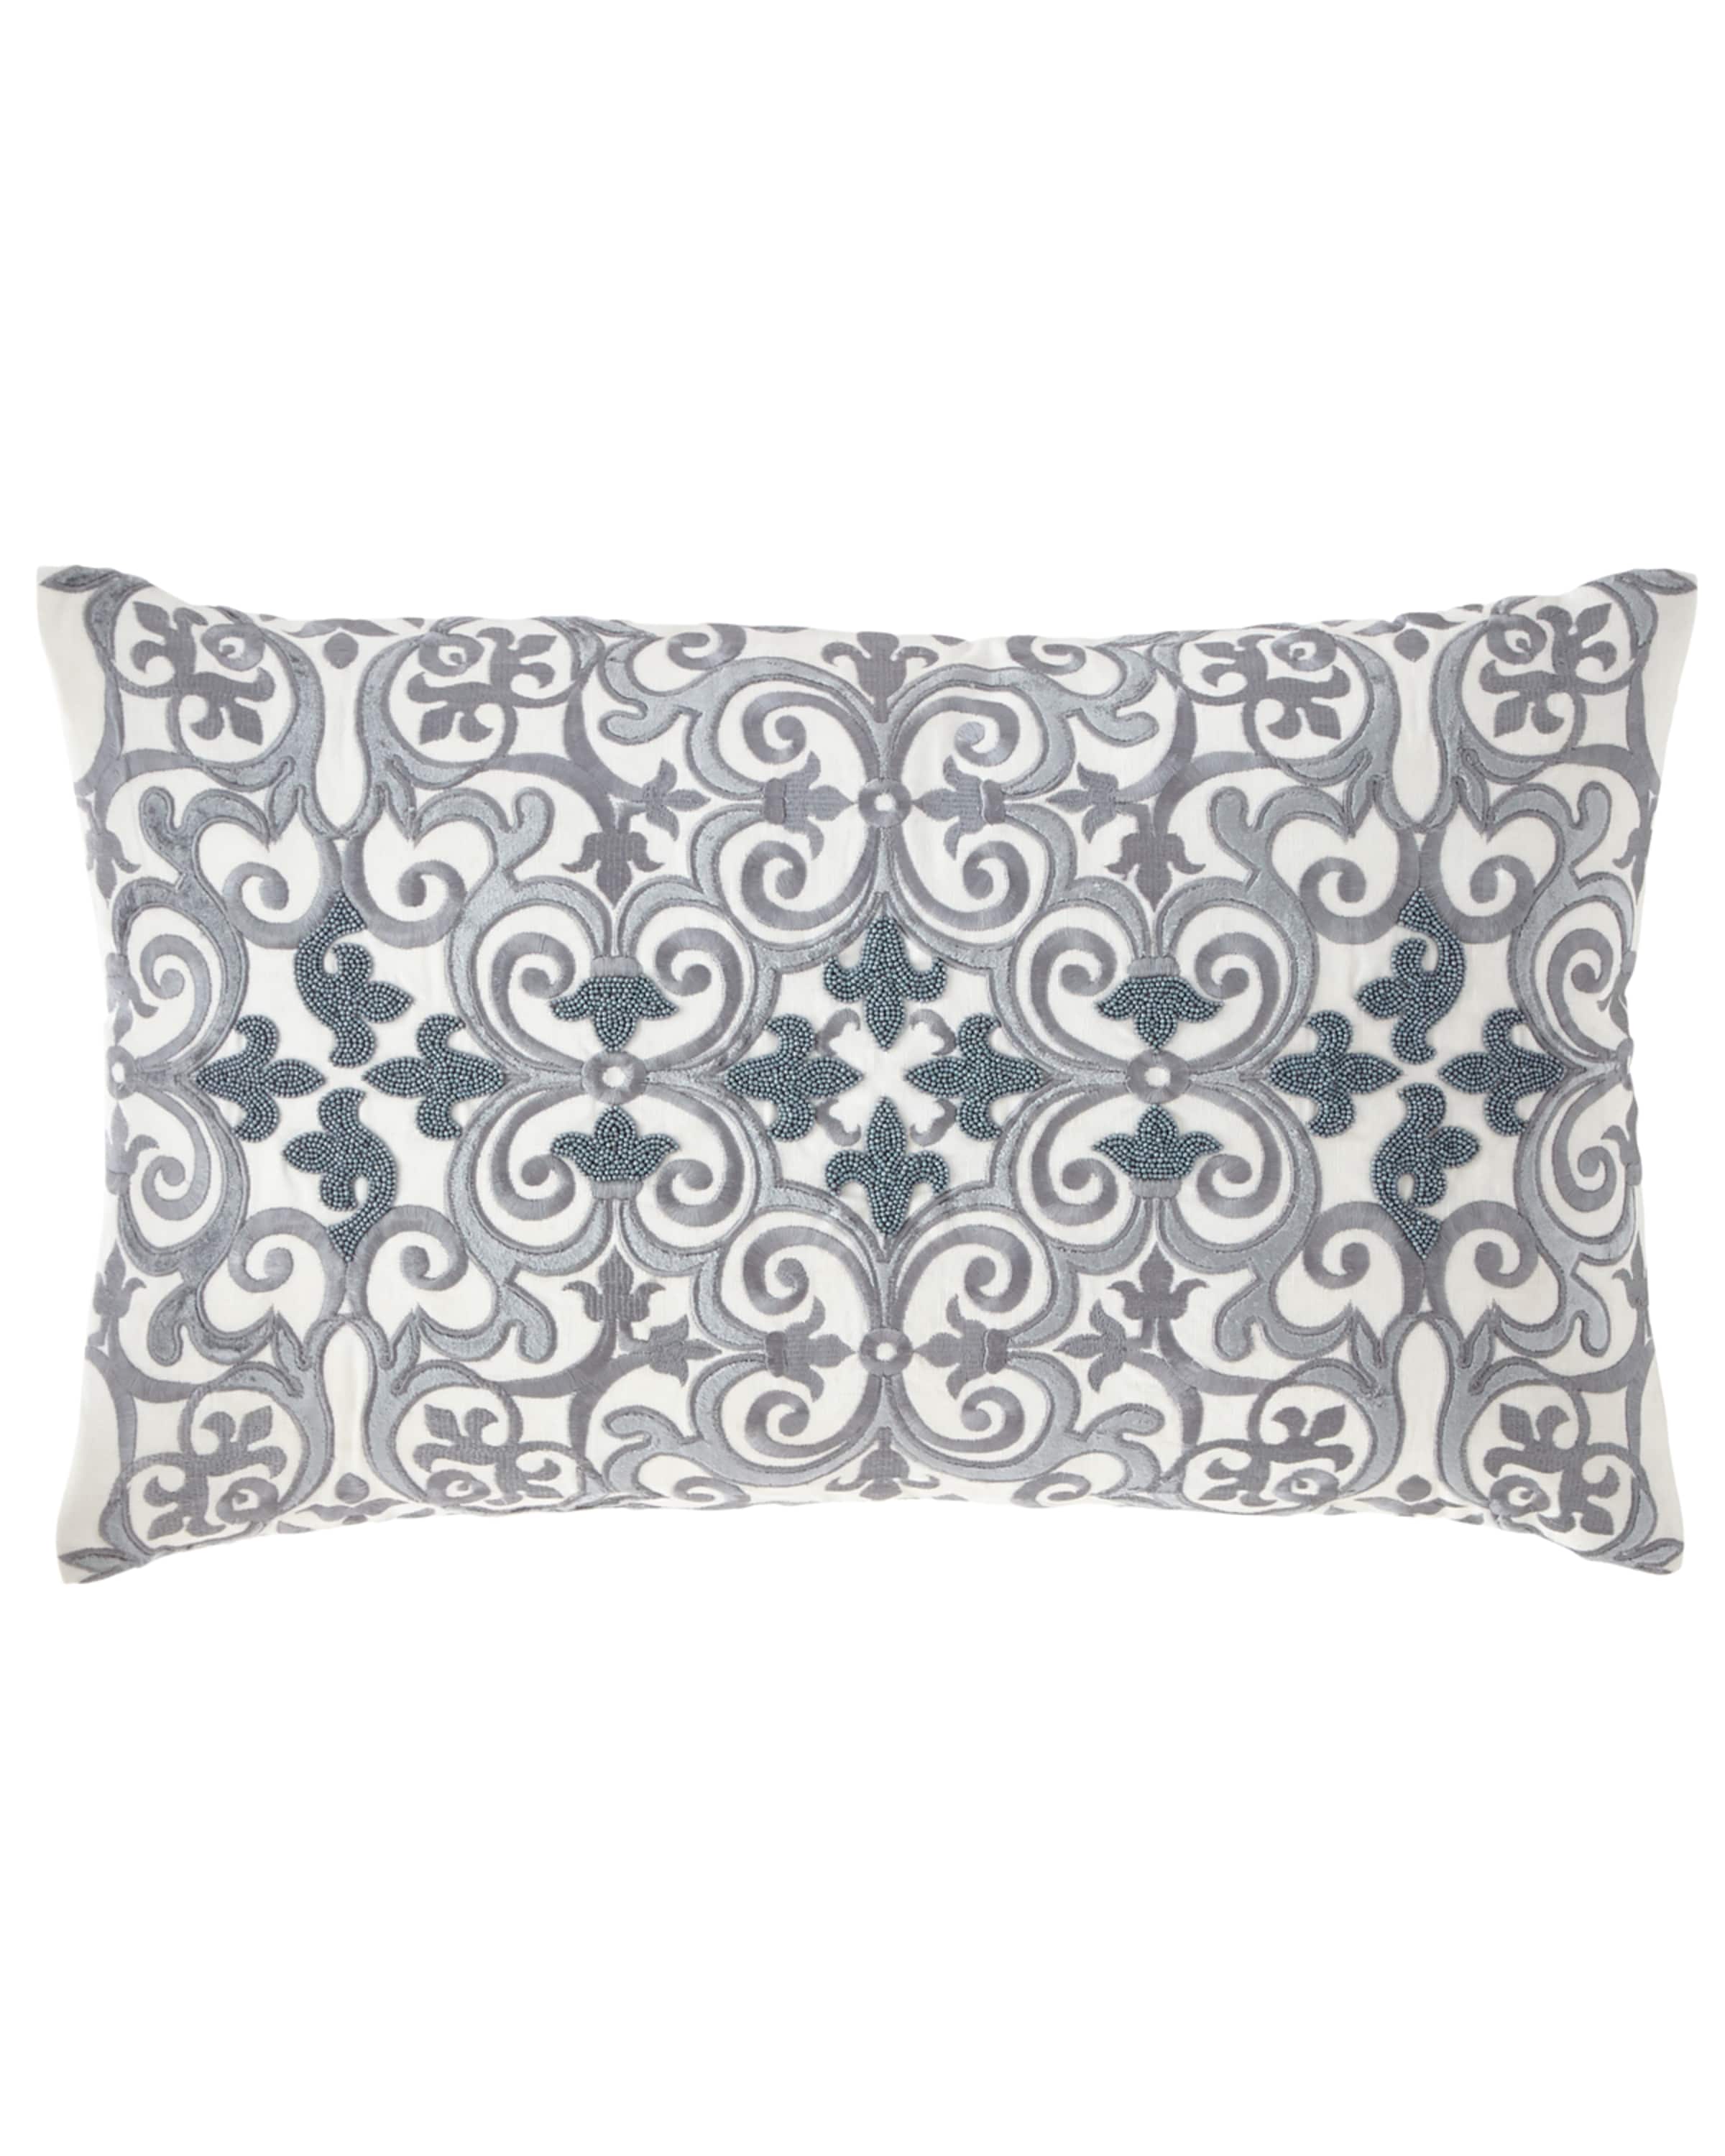 Callisto Home Darboux Scroll Embroidered Decorative Pillow